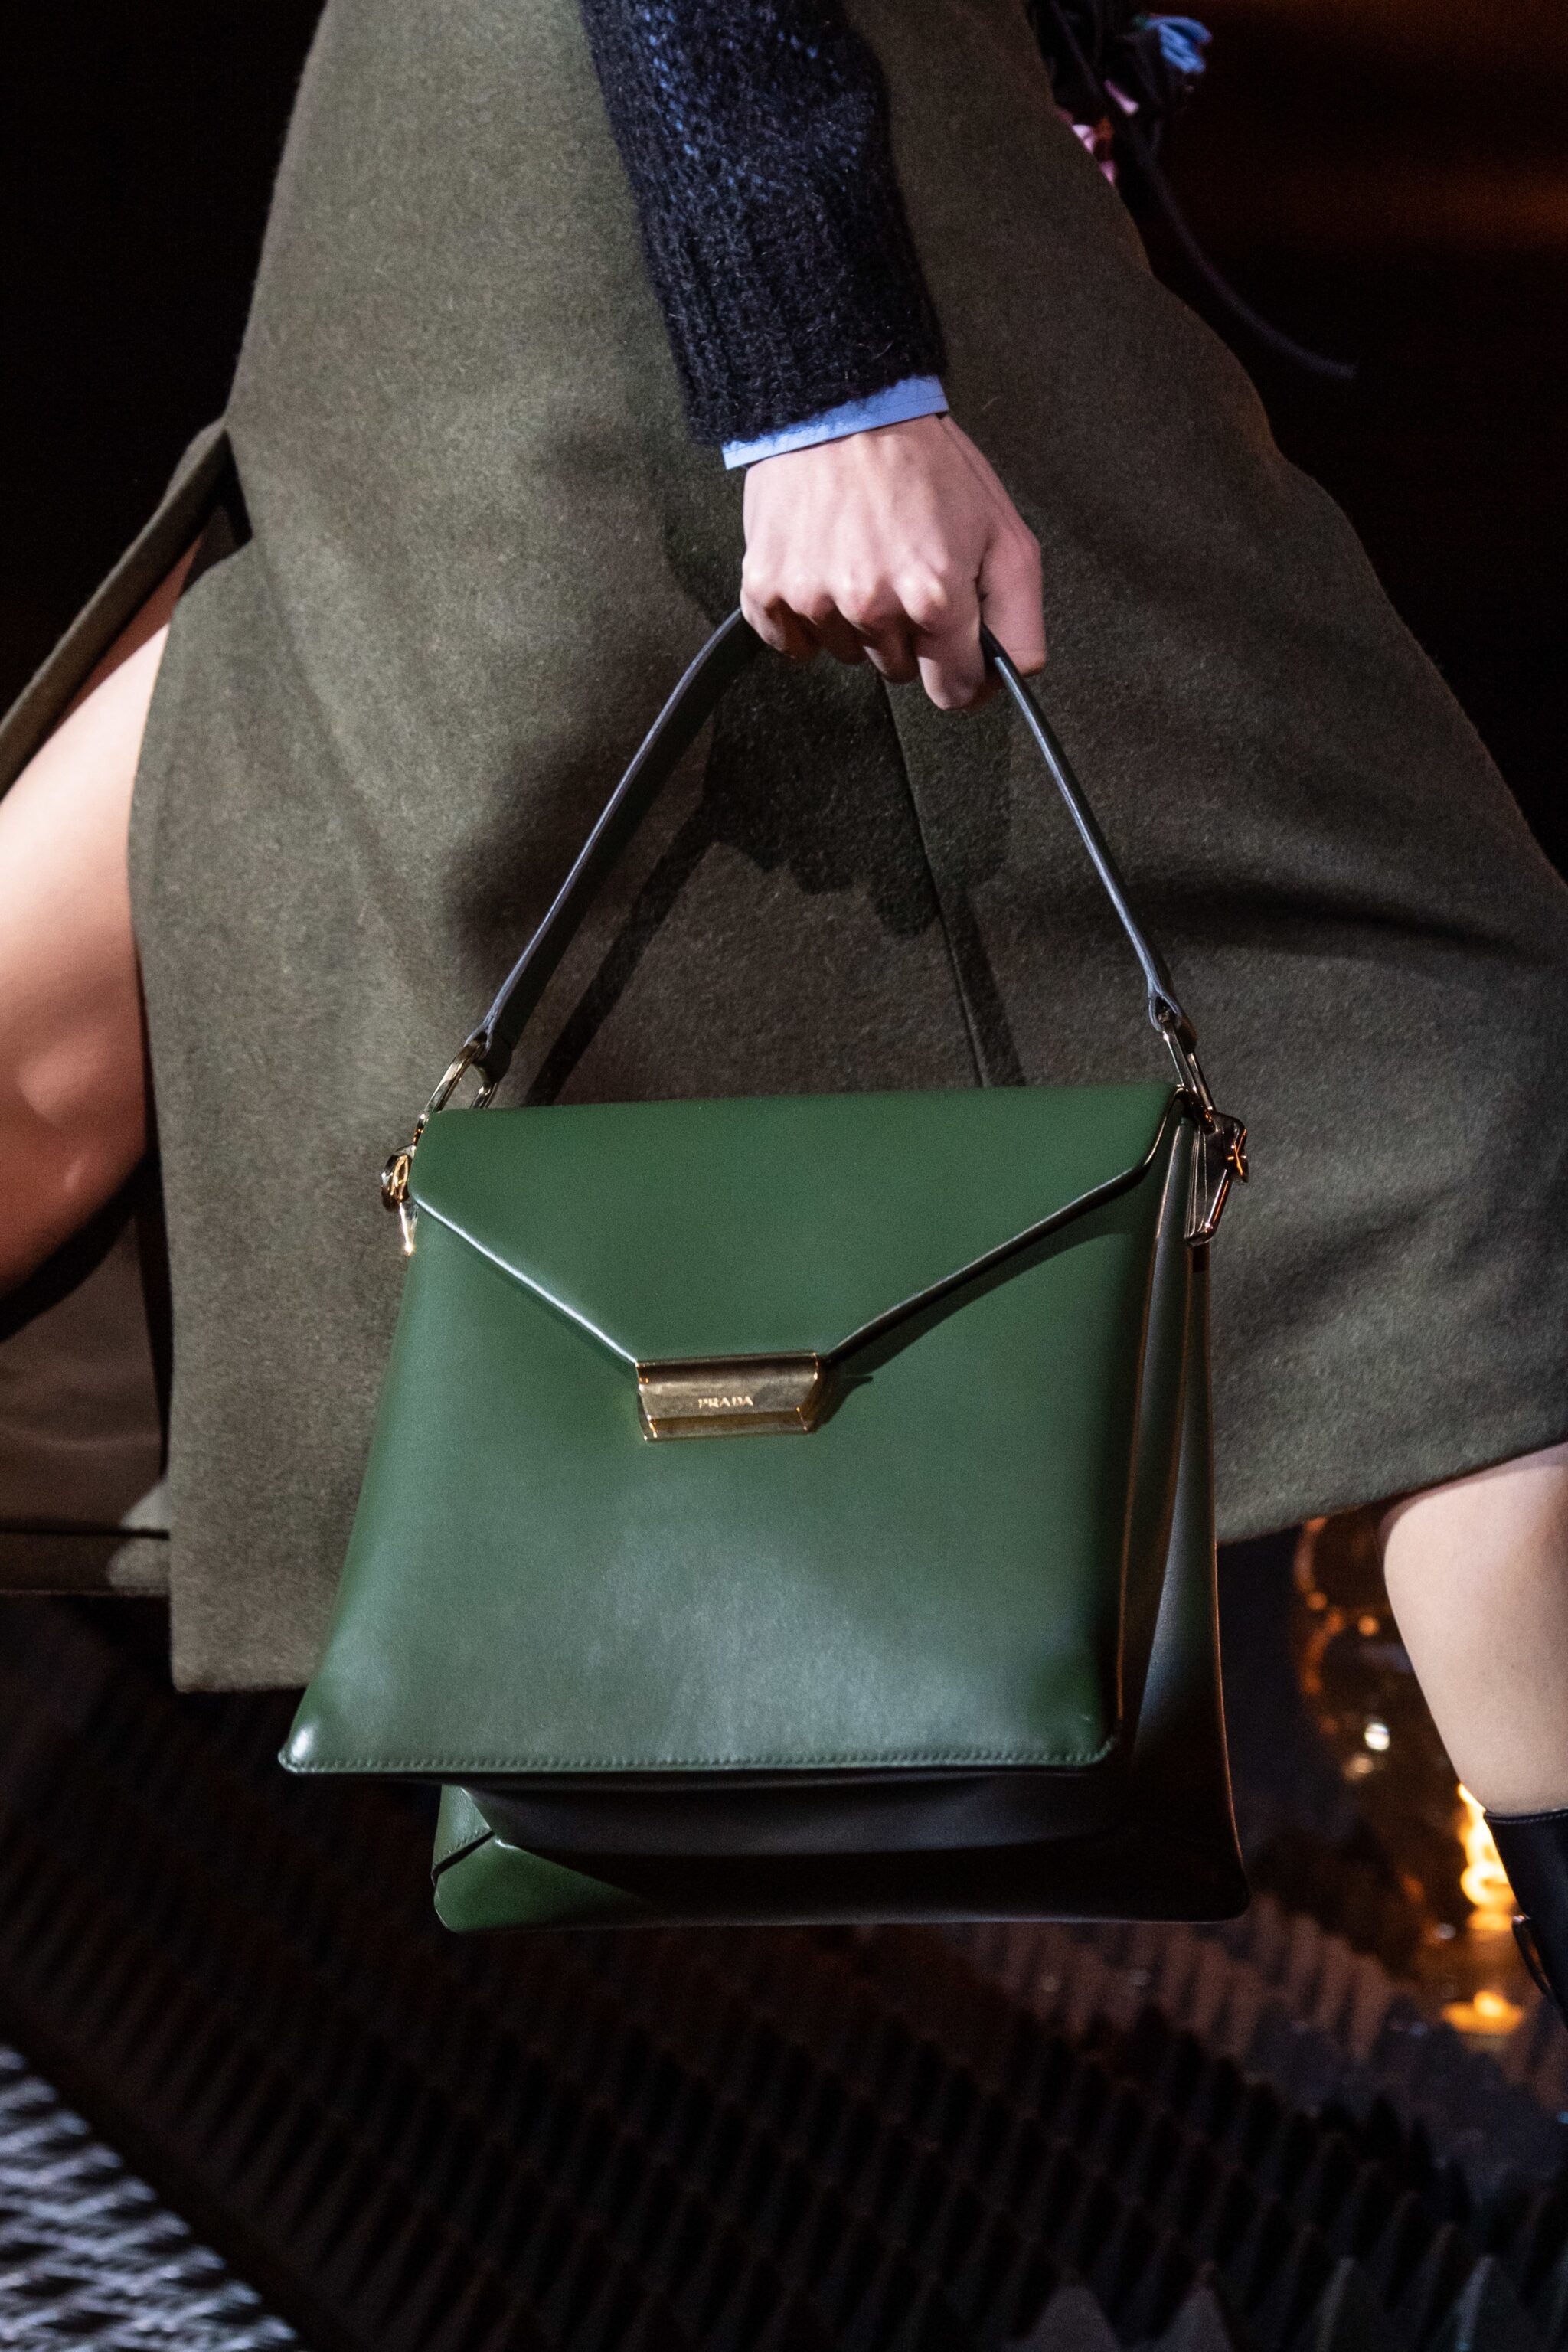 Prada Fall/Winter 2019 Runway Bag Collection | Spotted Fashion